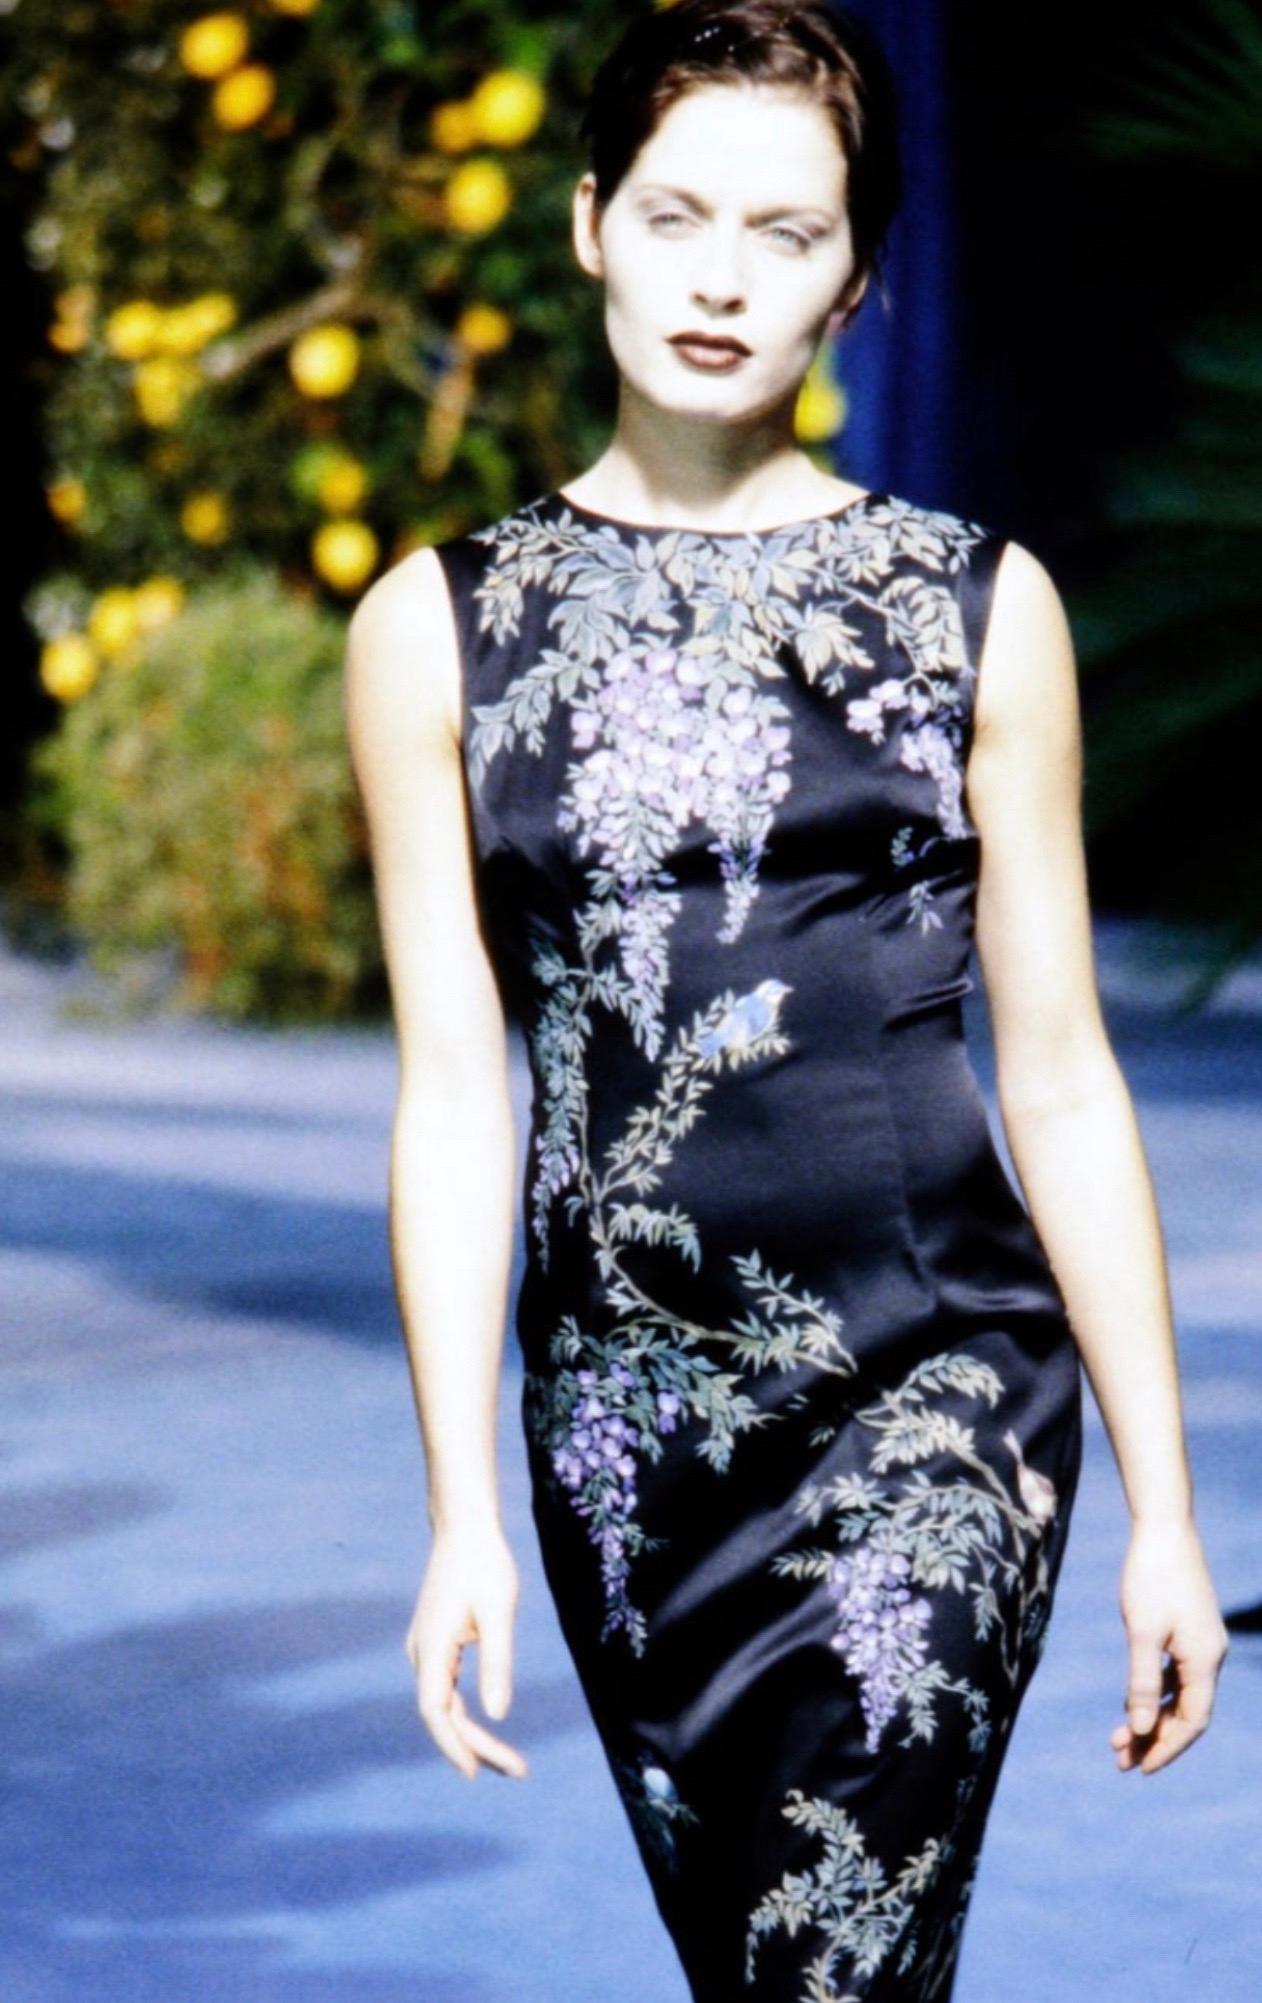 DOLCE & GABBANA 1998 Hand-Painted Print Floral Evening Dress Gown 40 For Sale 3